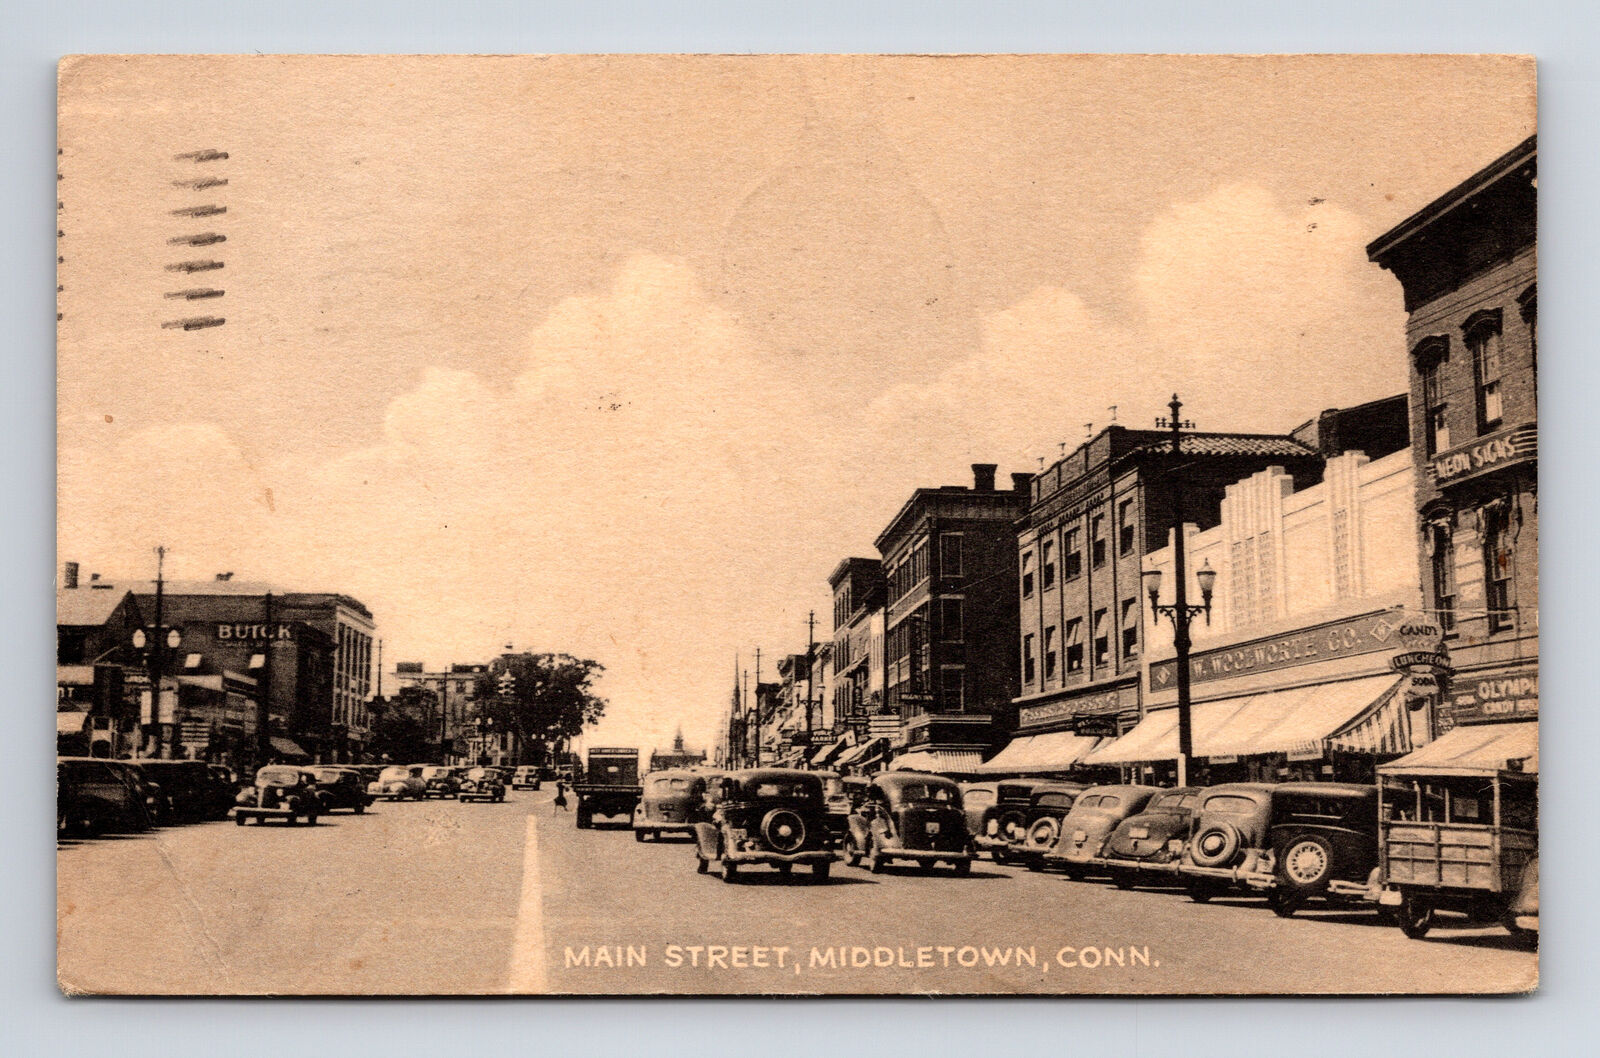 1941 Main Street Olympic Candy Soda Fountain Middletown CT COLLOTYPE Postcard